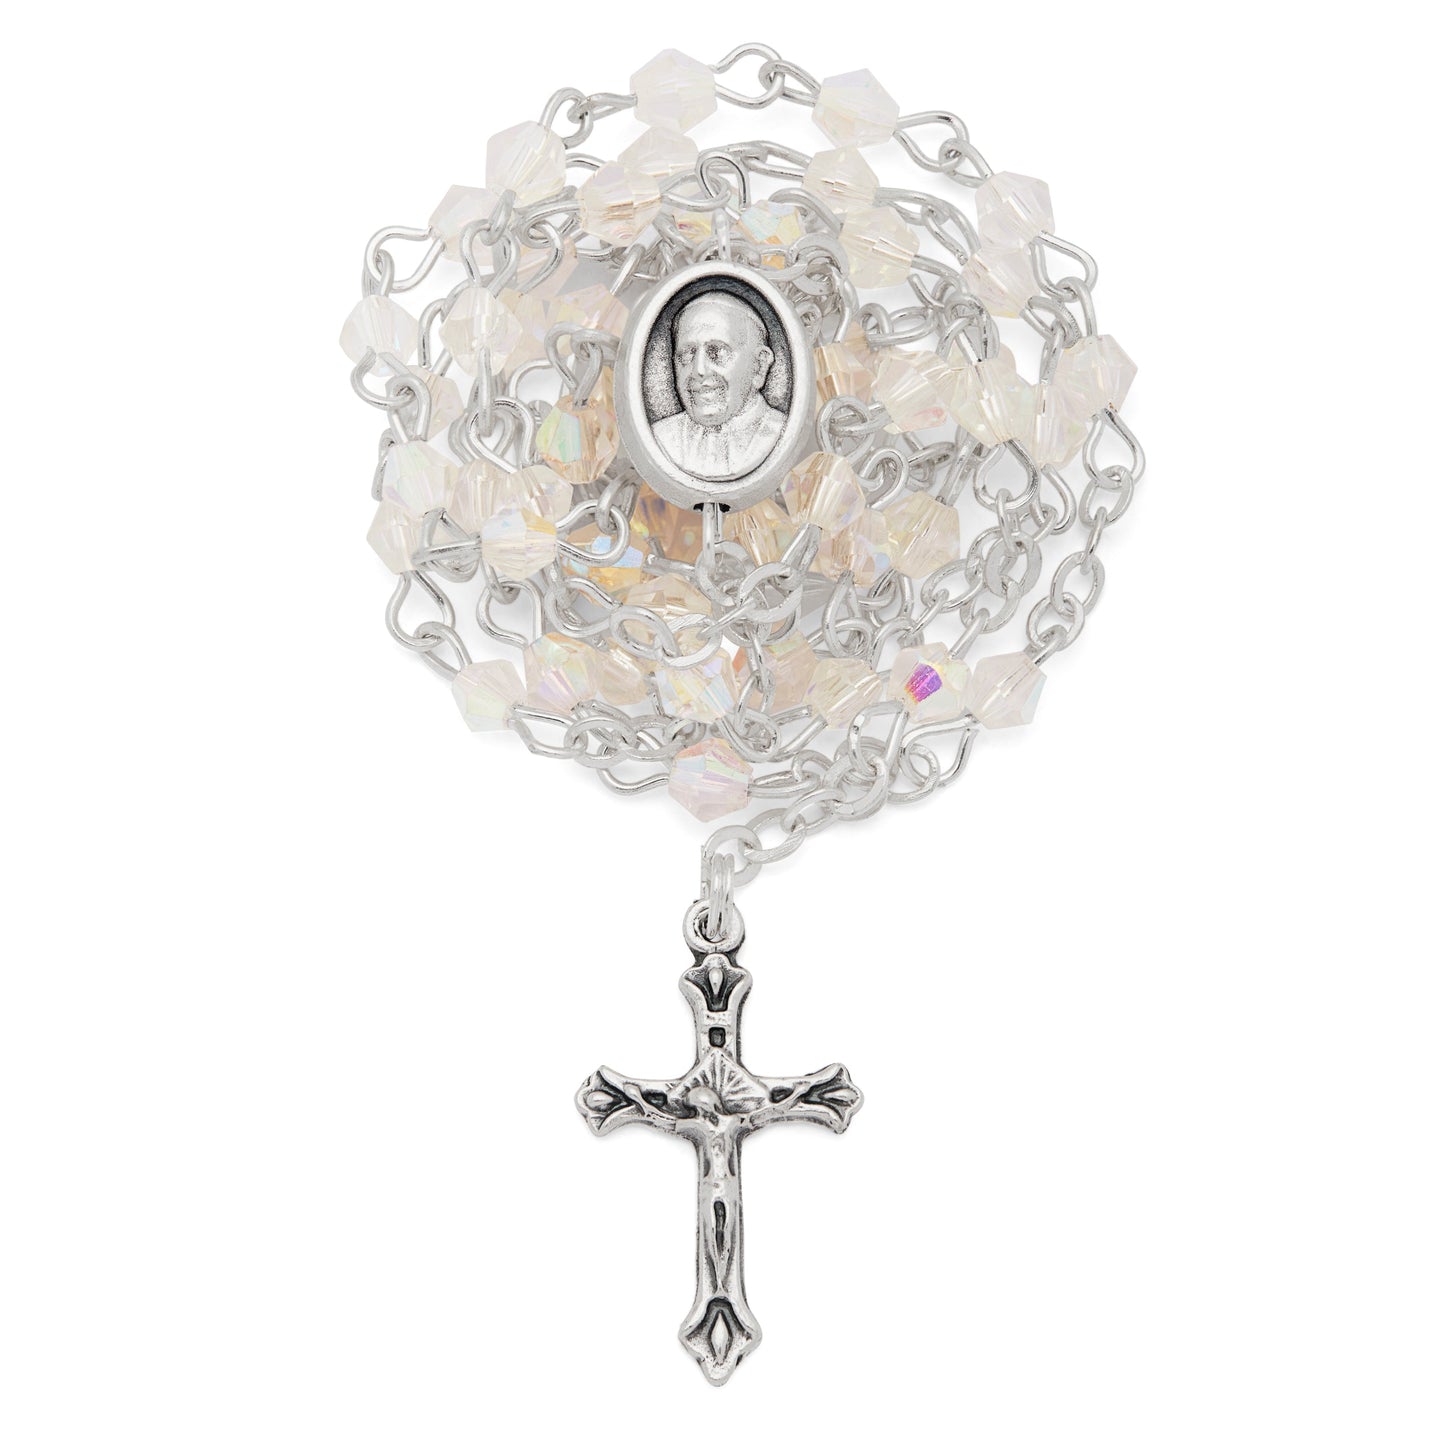 Mondo Cattolico Rosary Box 3.5x4 cm (1.38x1.57 in) / 3 mm (0.12 in) / 37.5 cm (14.76 in) Small White Enameled Mary Untier of Knots Rosary Case With White Crystal Rosary